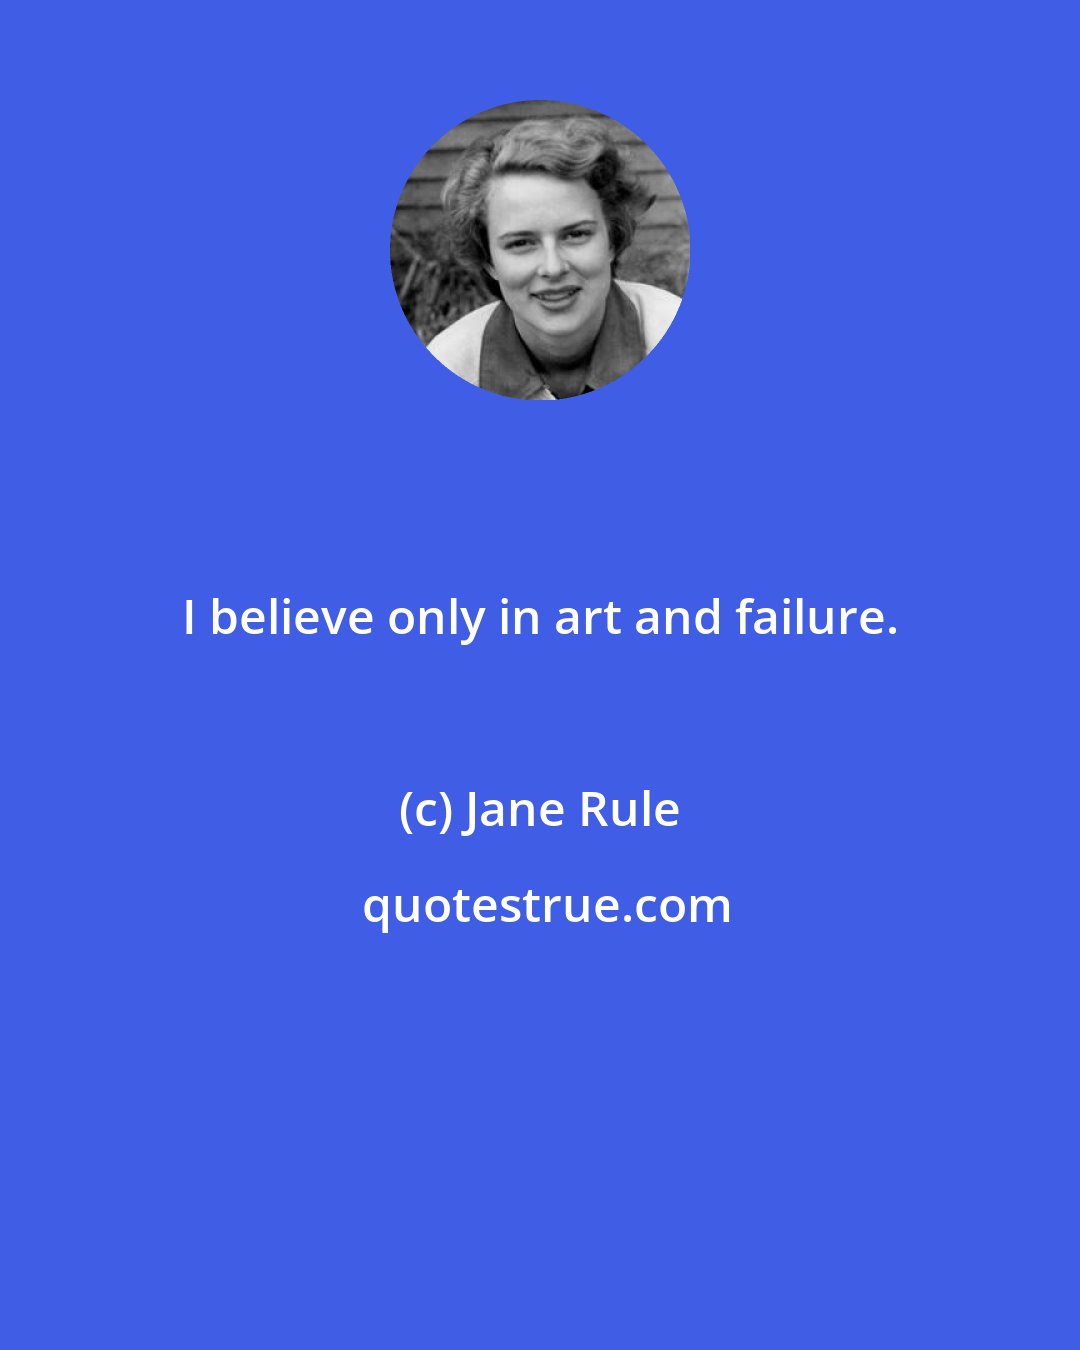 Jane Rule: I believe only in art and failure.